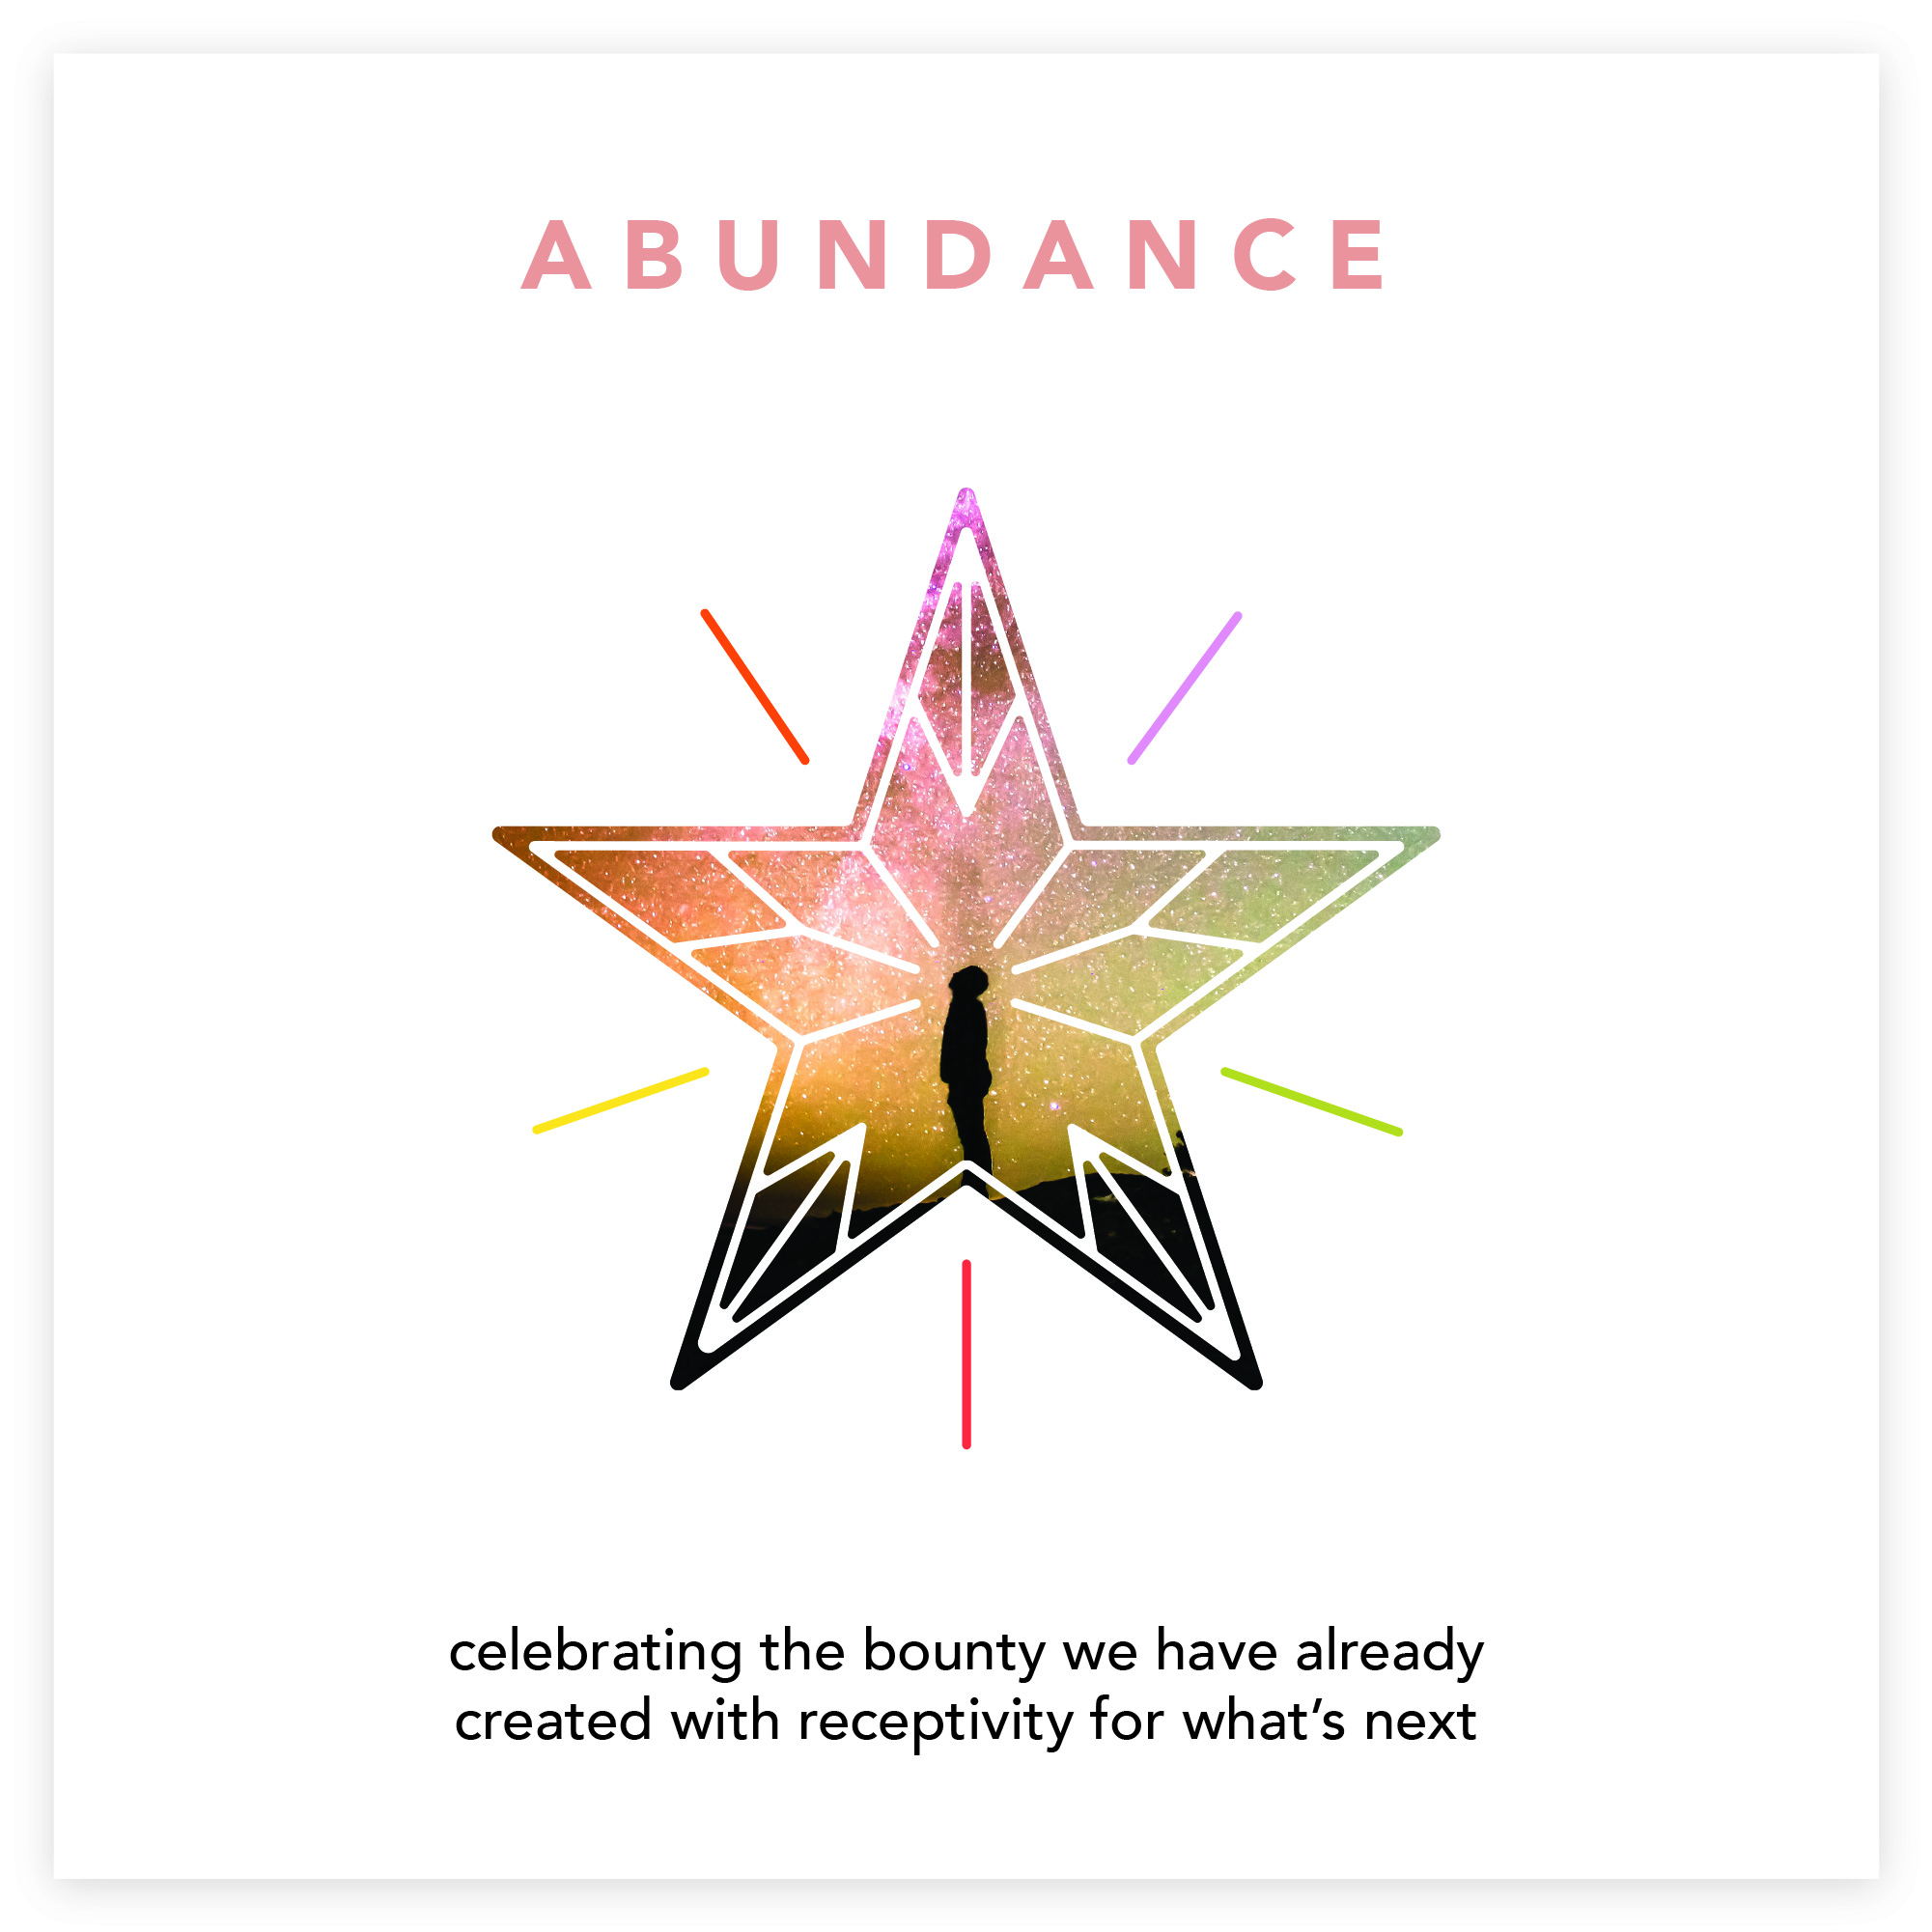 ABUNDANCE - celebrating the bounty we have already created with receptivity for what’s next